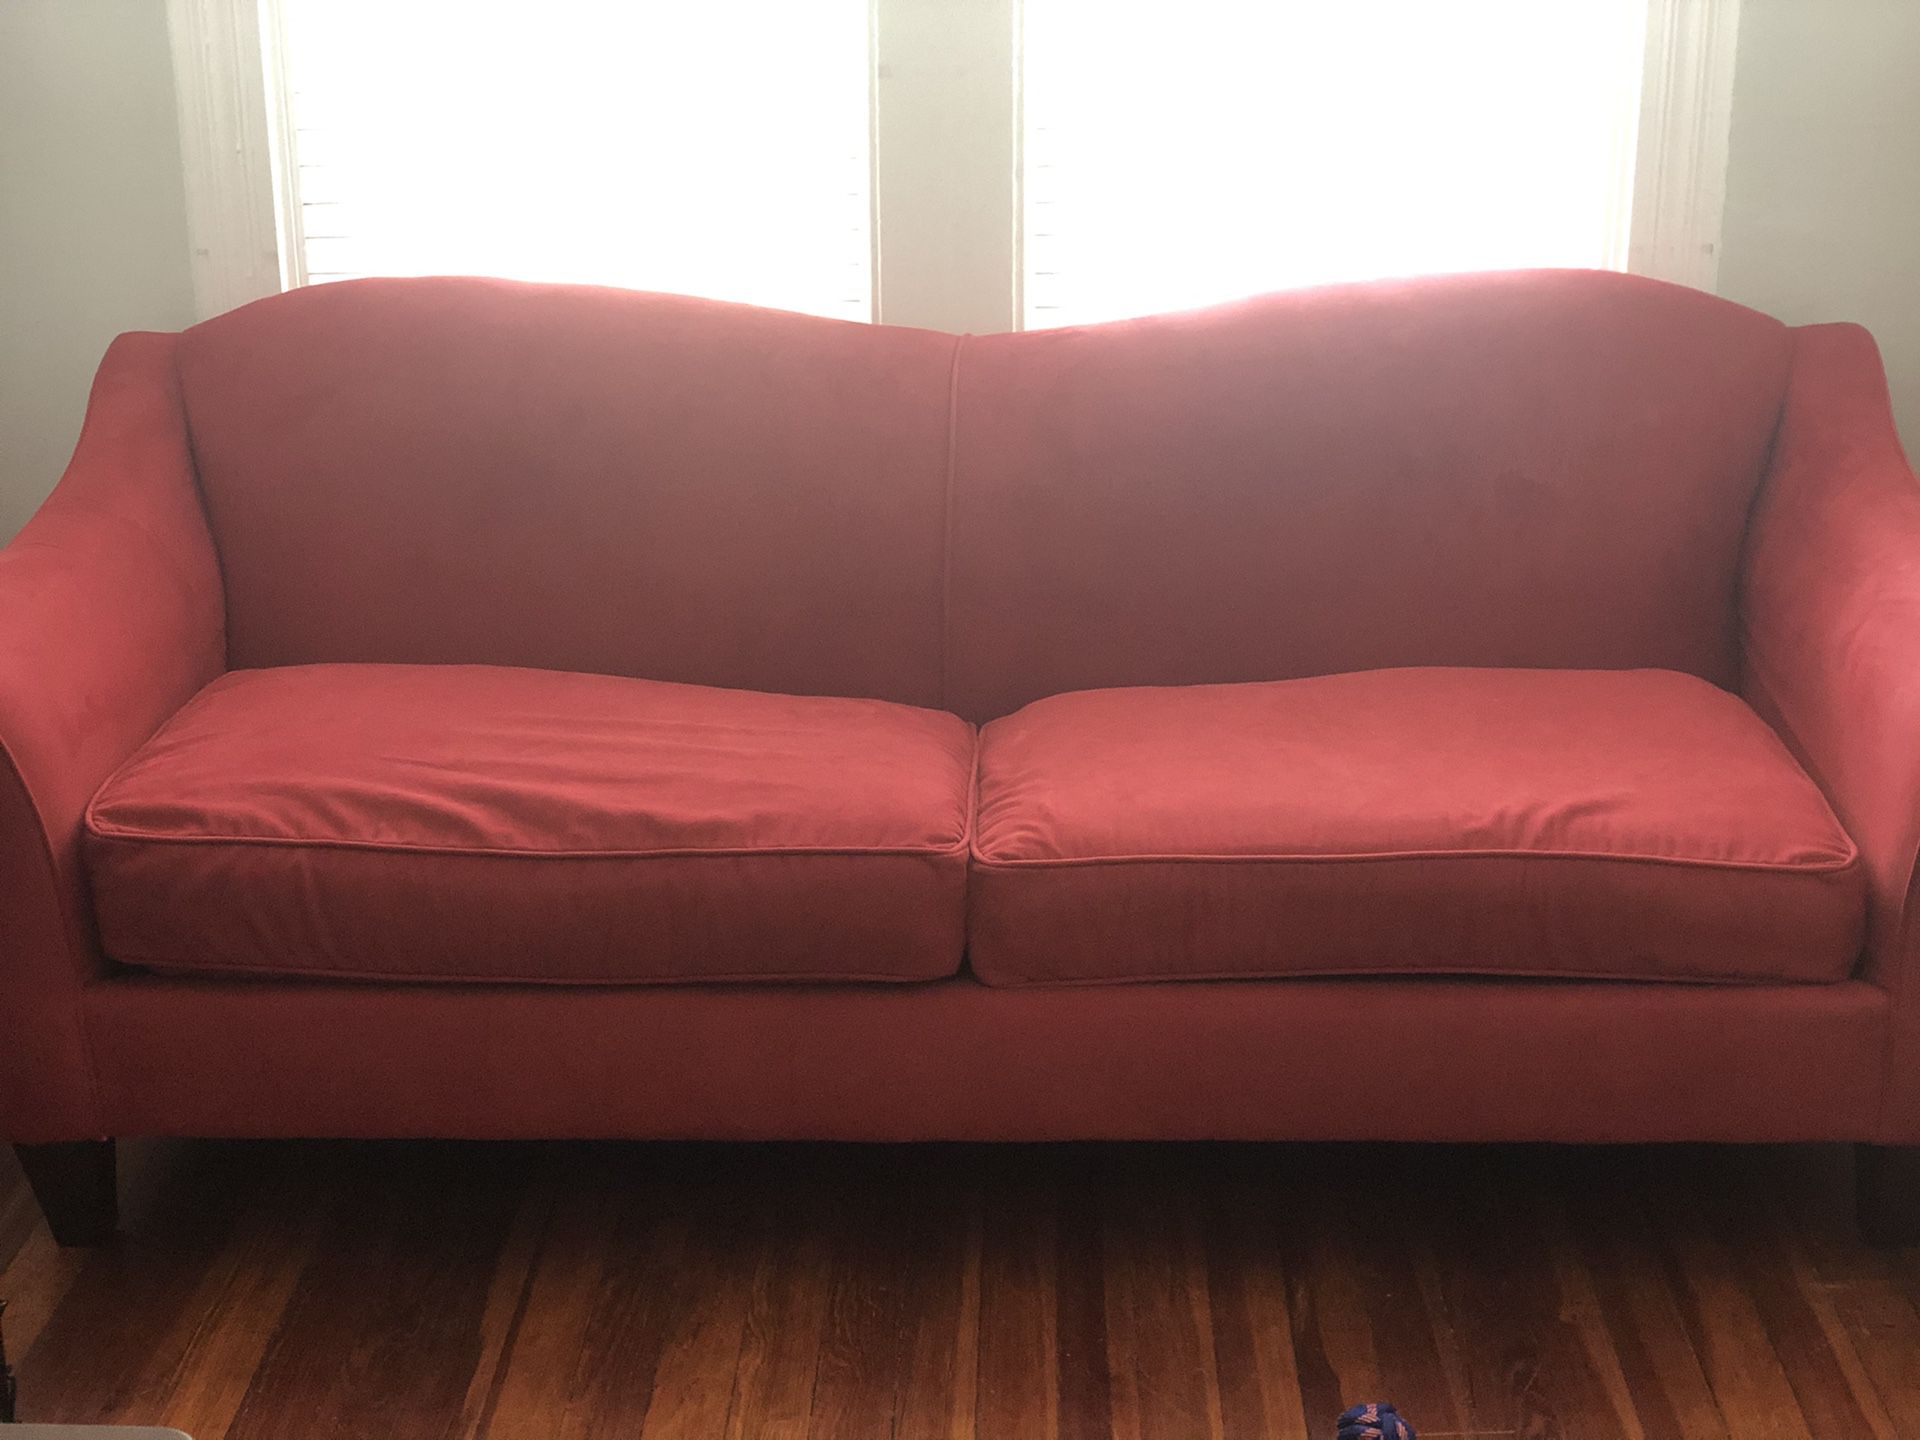 $50 Red, Comfortable Couch Today